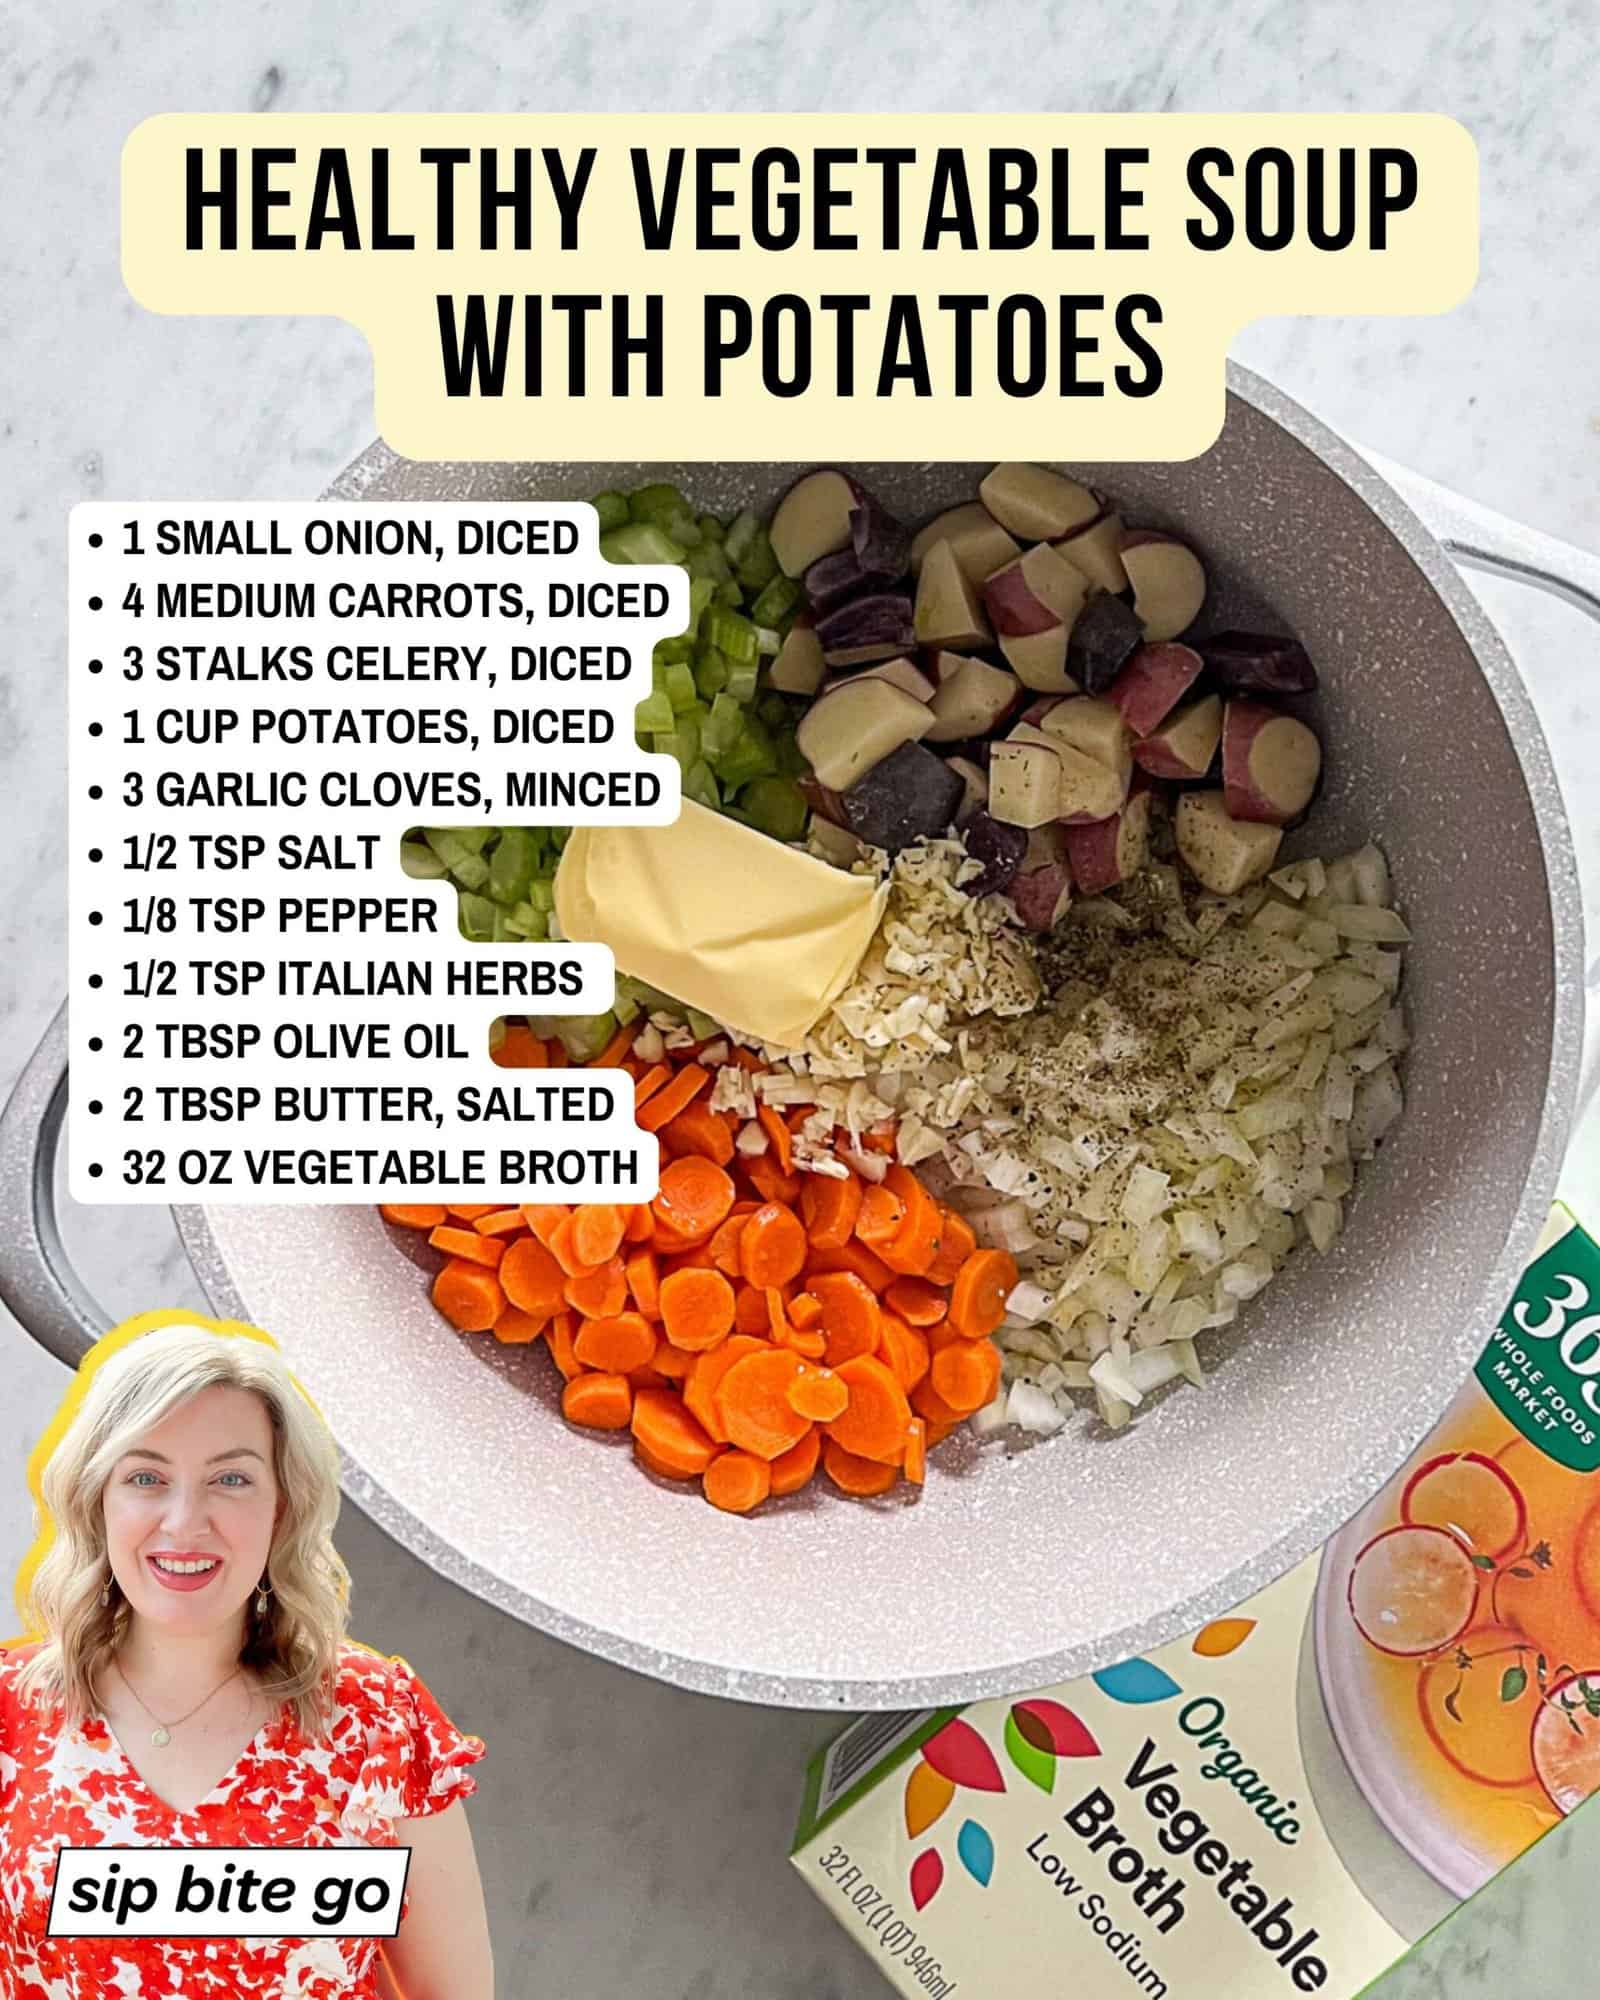 Infographic with ingredients list for Healthy Vegetable Soup with Potatoes